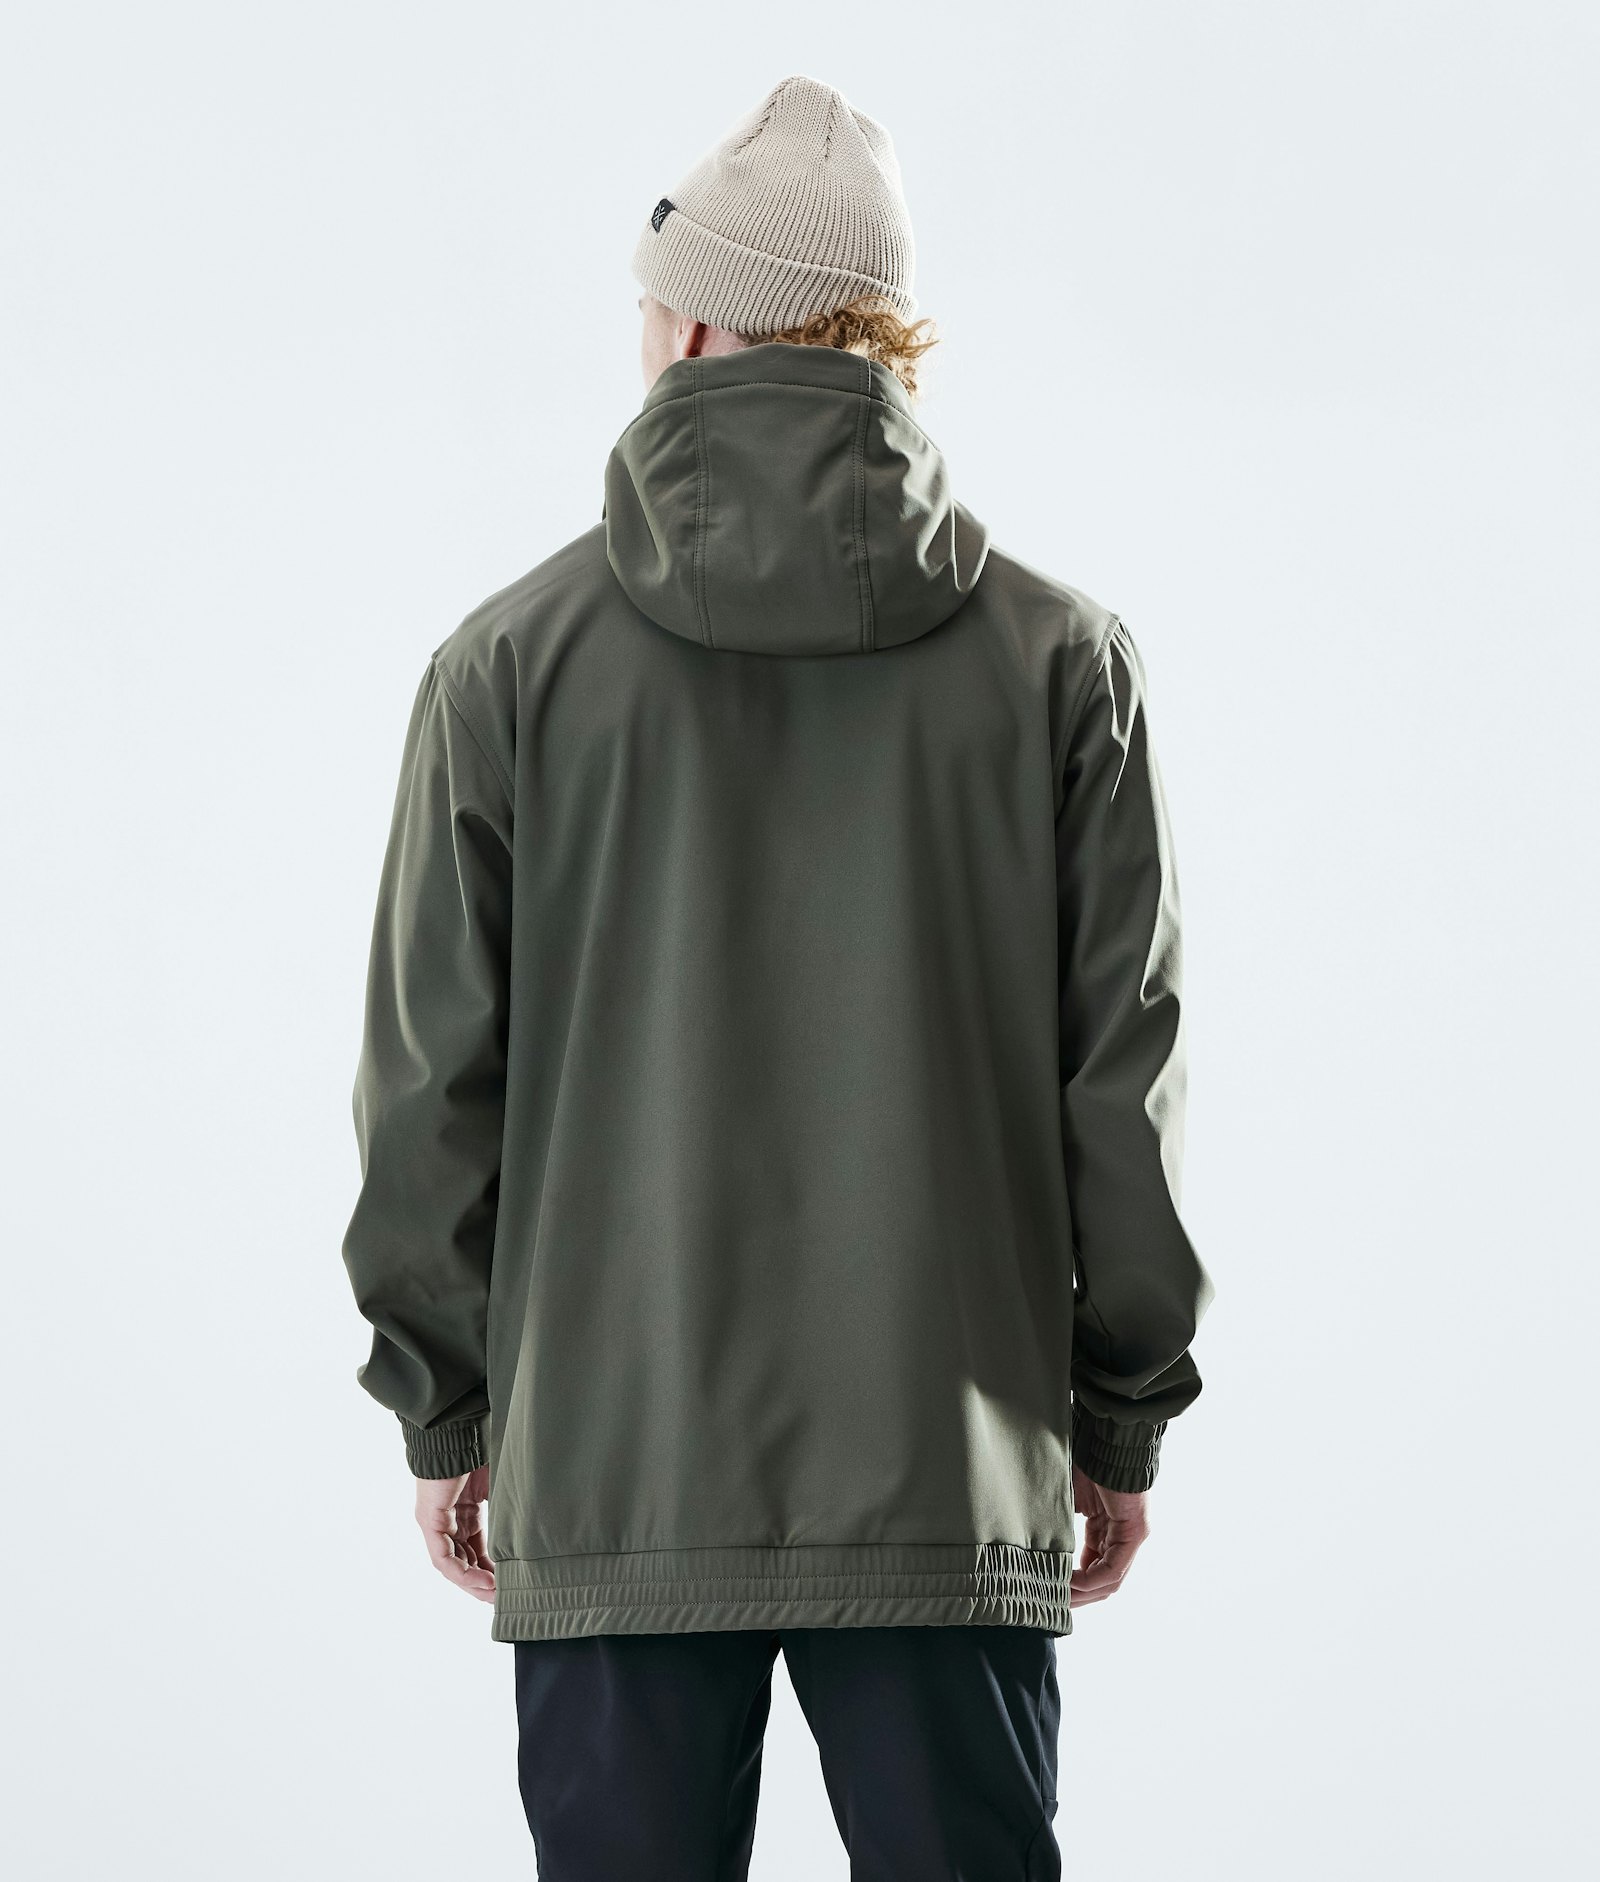 Nomad Giacca Outdoor Uomo Olive Green